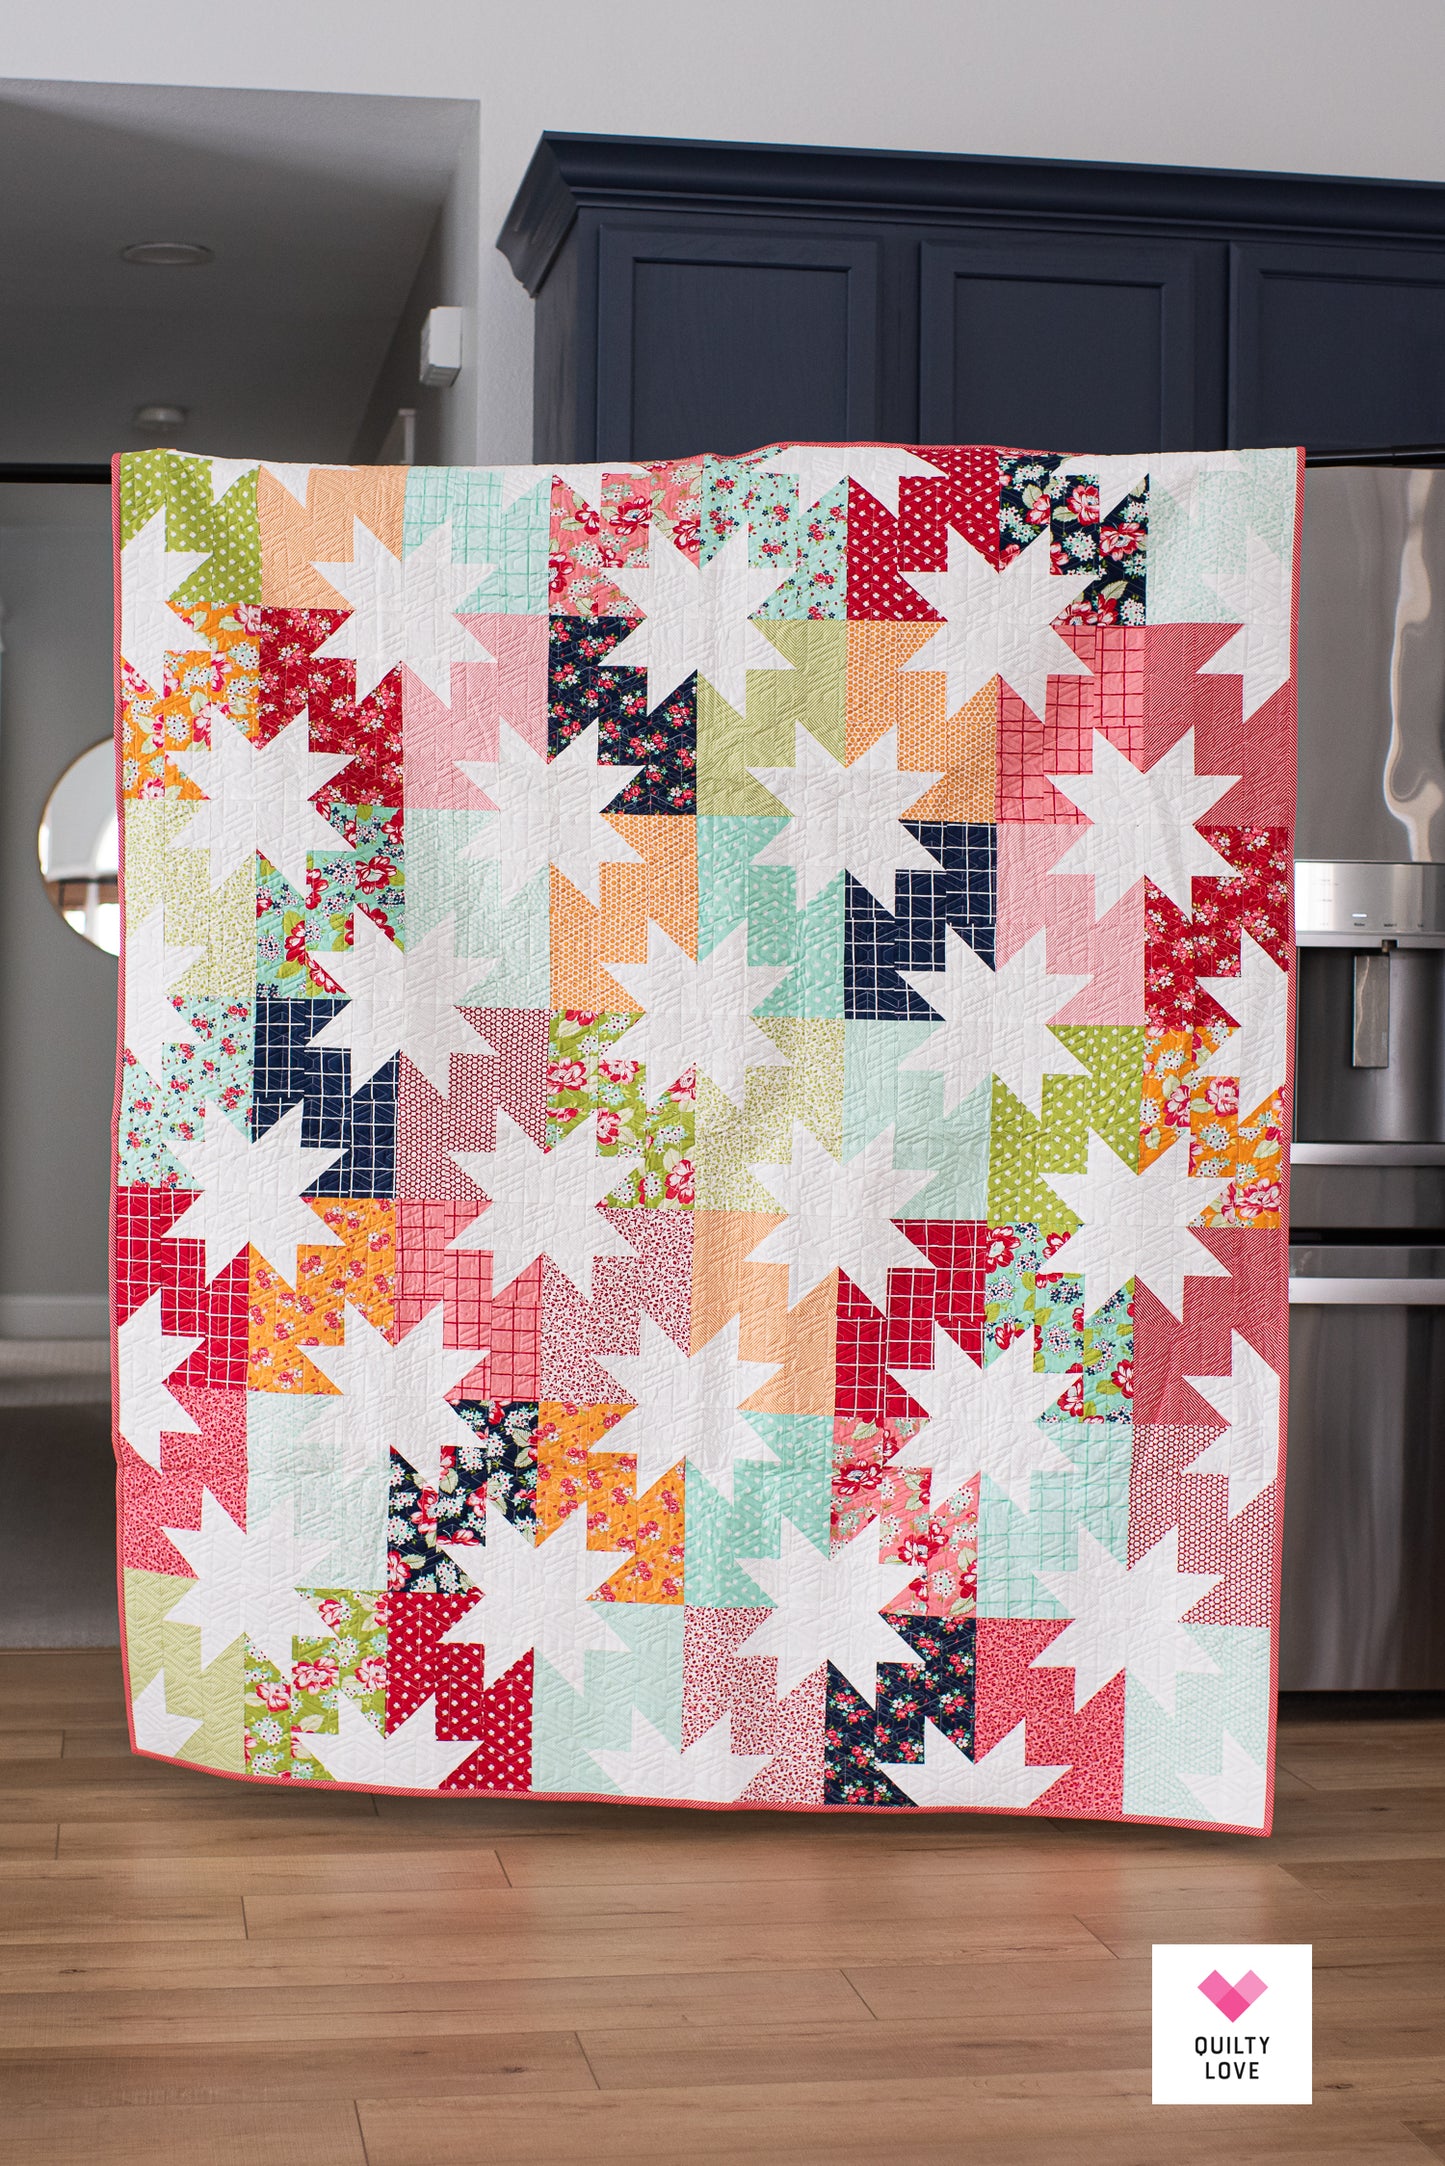 Star Pop Quilt - The Bonnie and Camille one